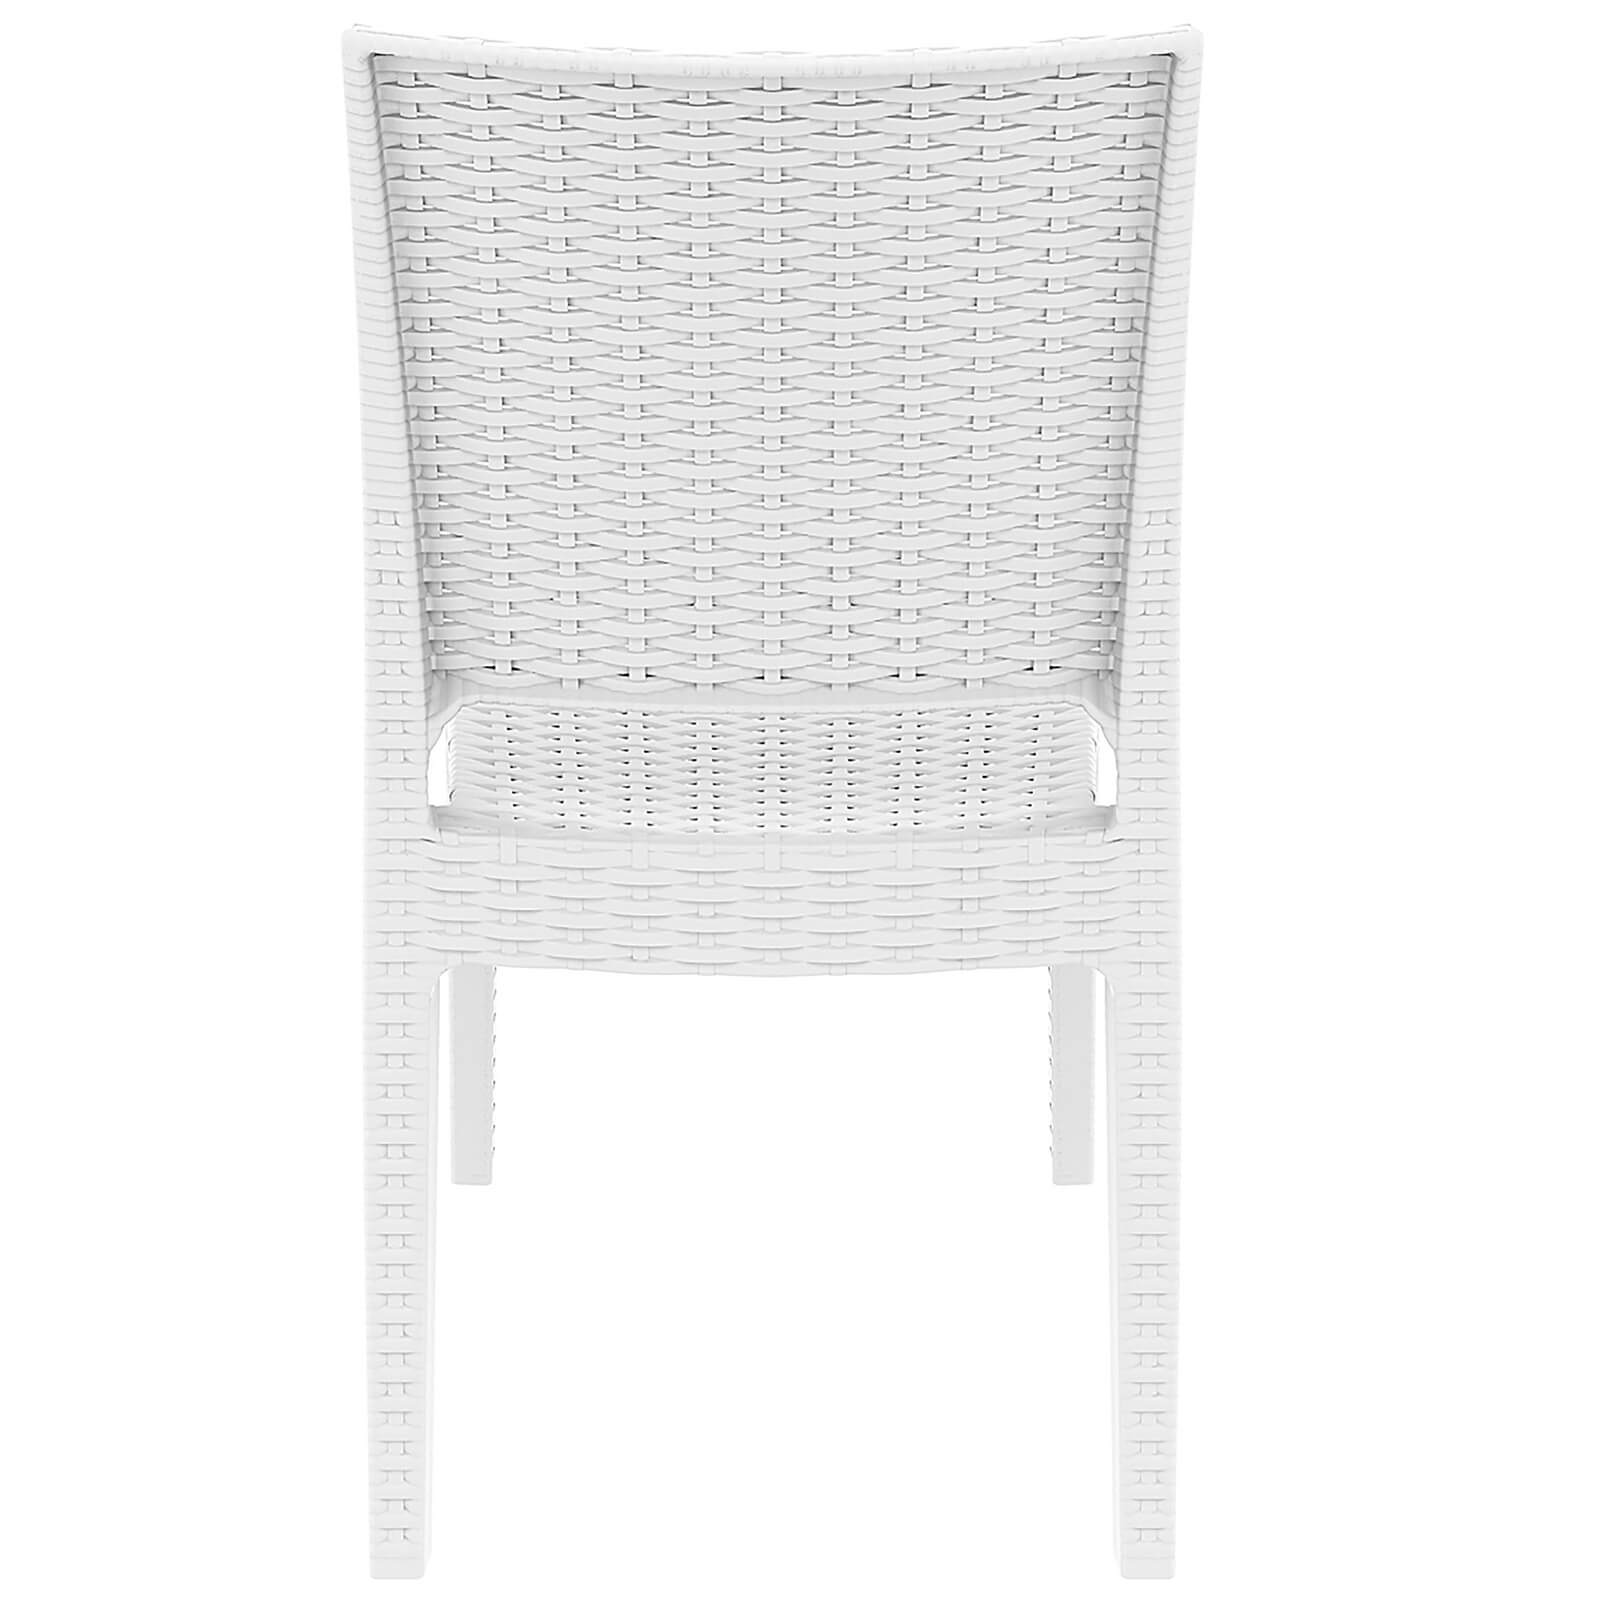 Arcadia | Modern, Stackable, Plastic Outdoor Dining Chairs | Set Of 2 | White